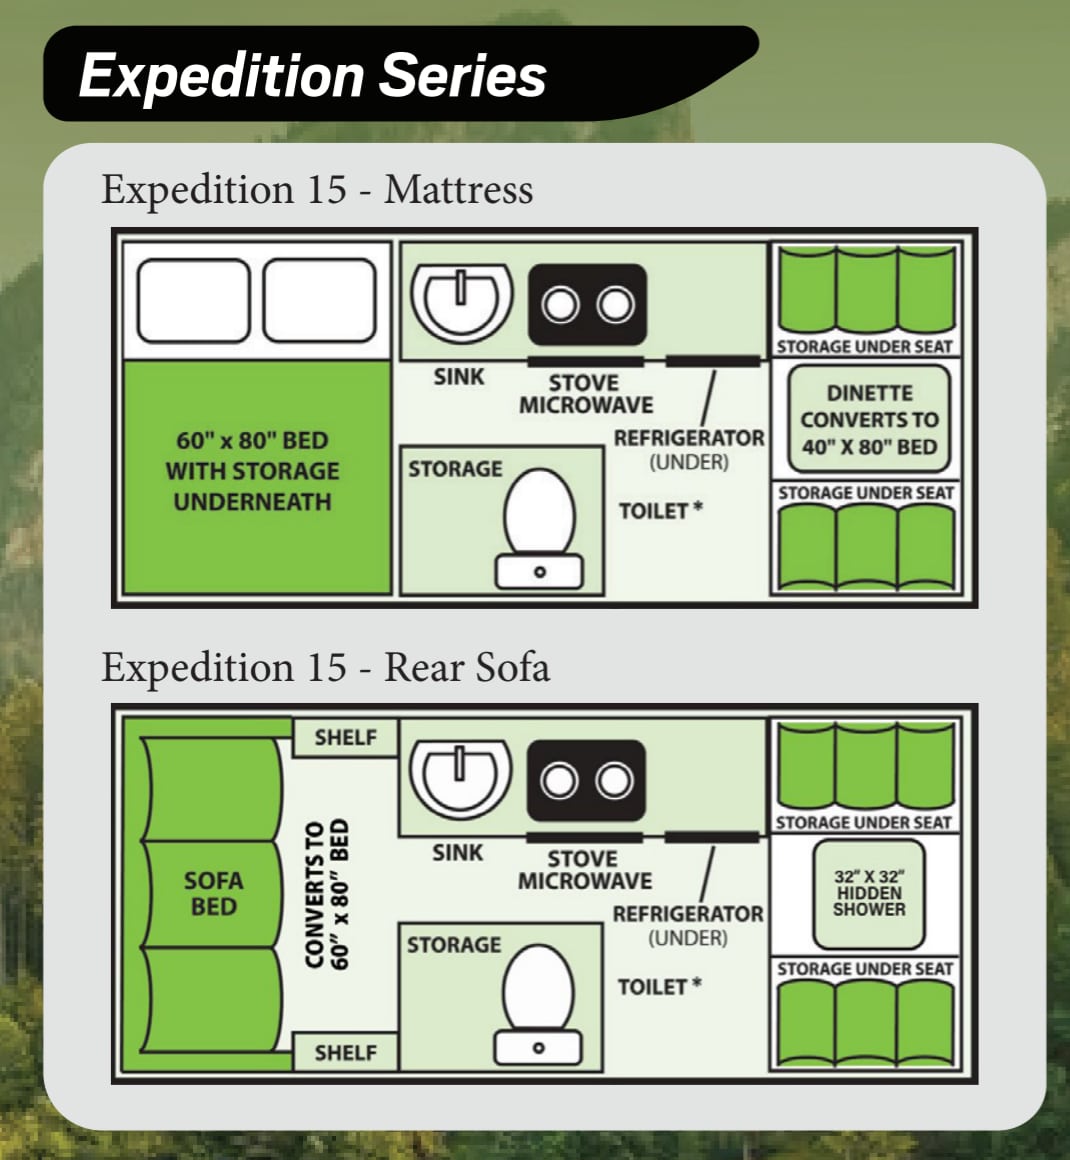 Floor plans for compact living spaces with sleeping, cooking, and bathroom facilities, designed for expeditions.